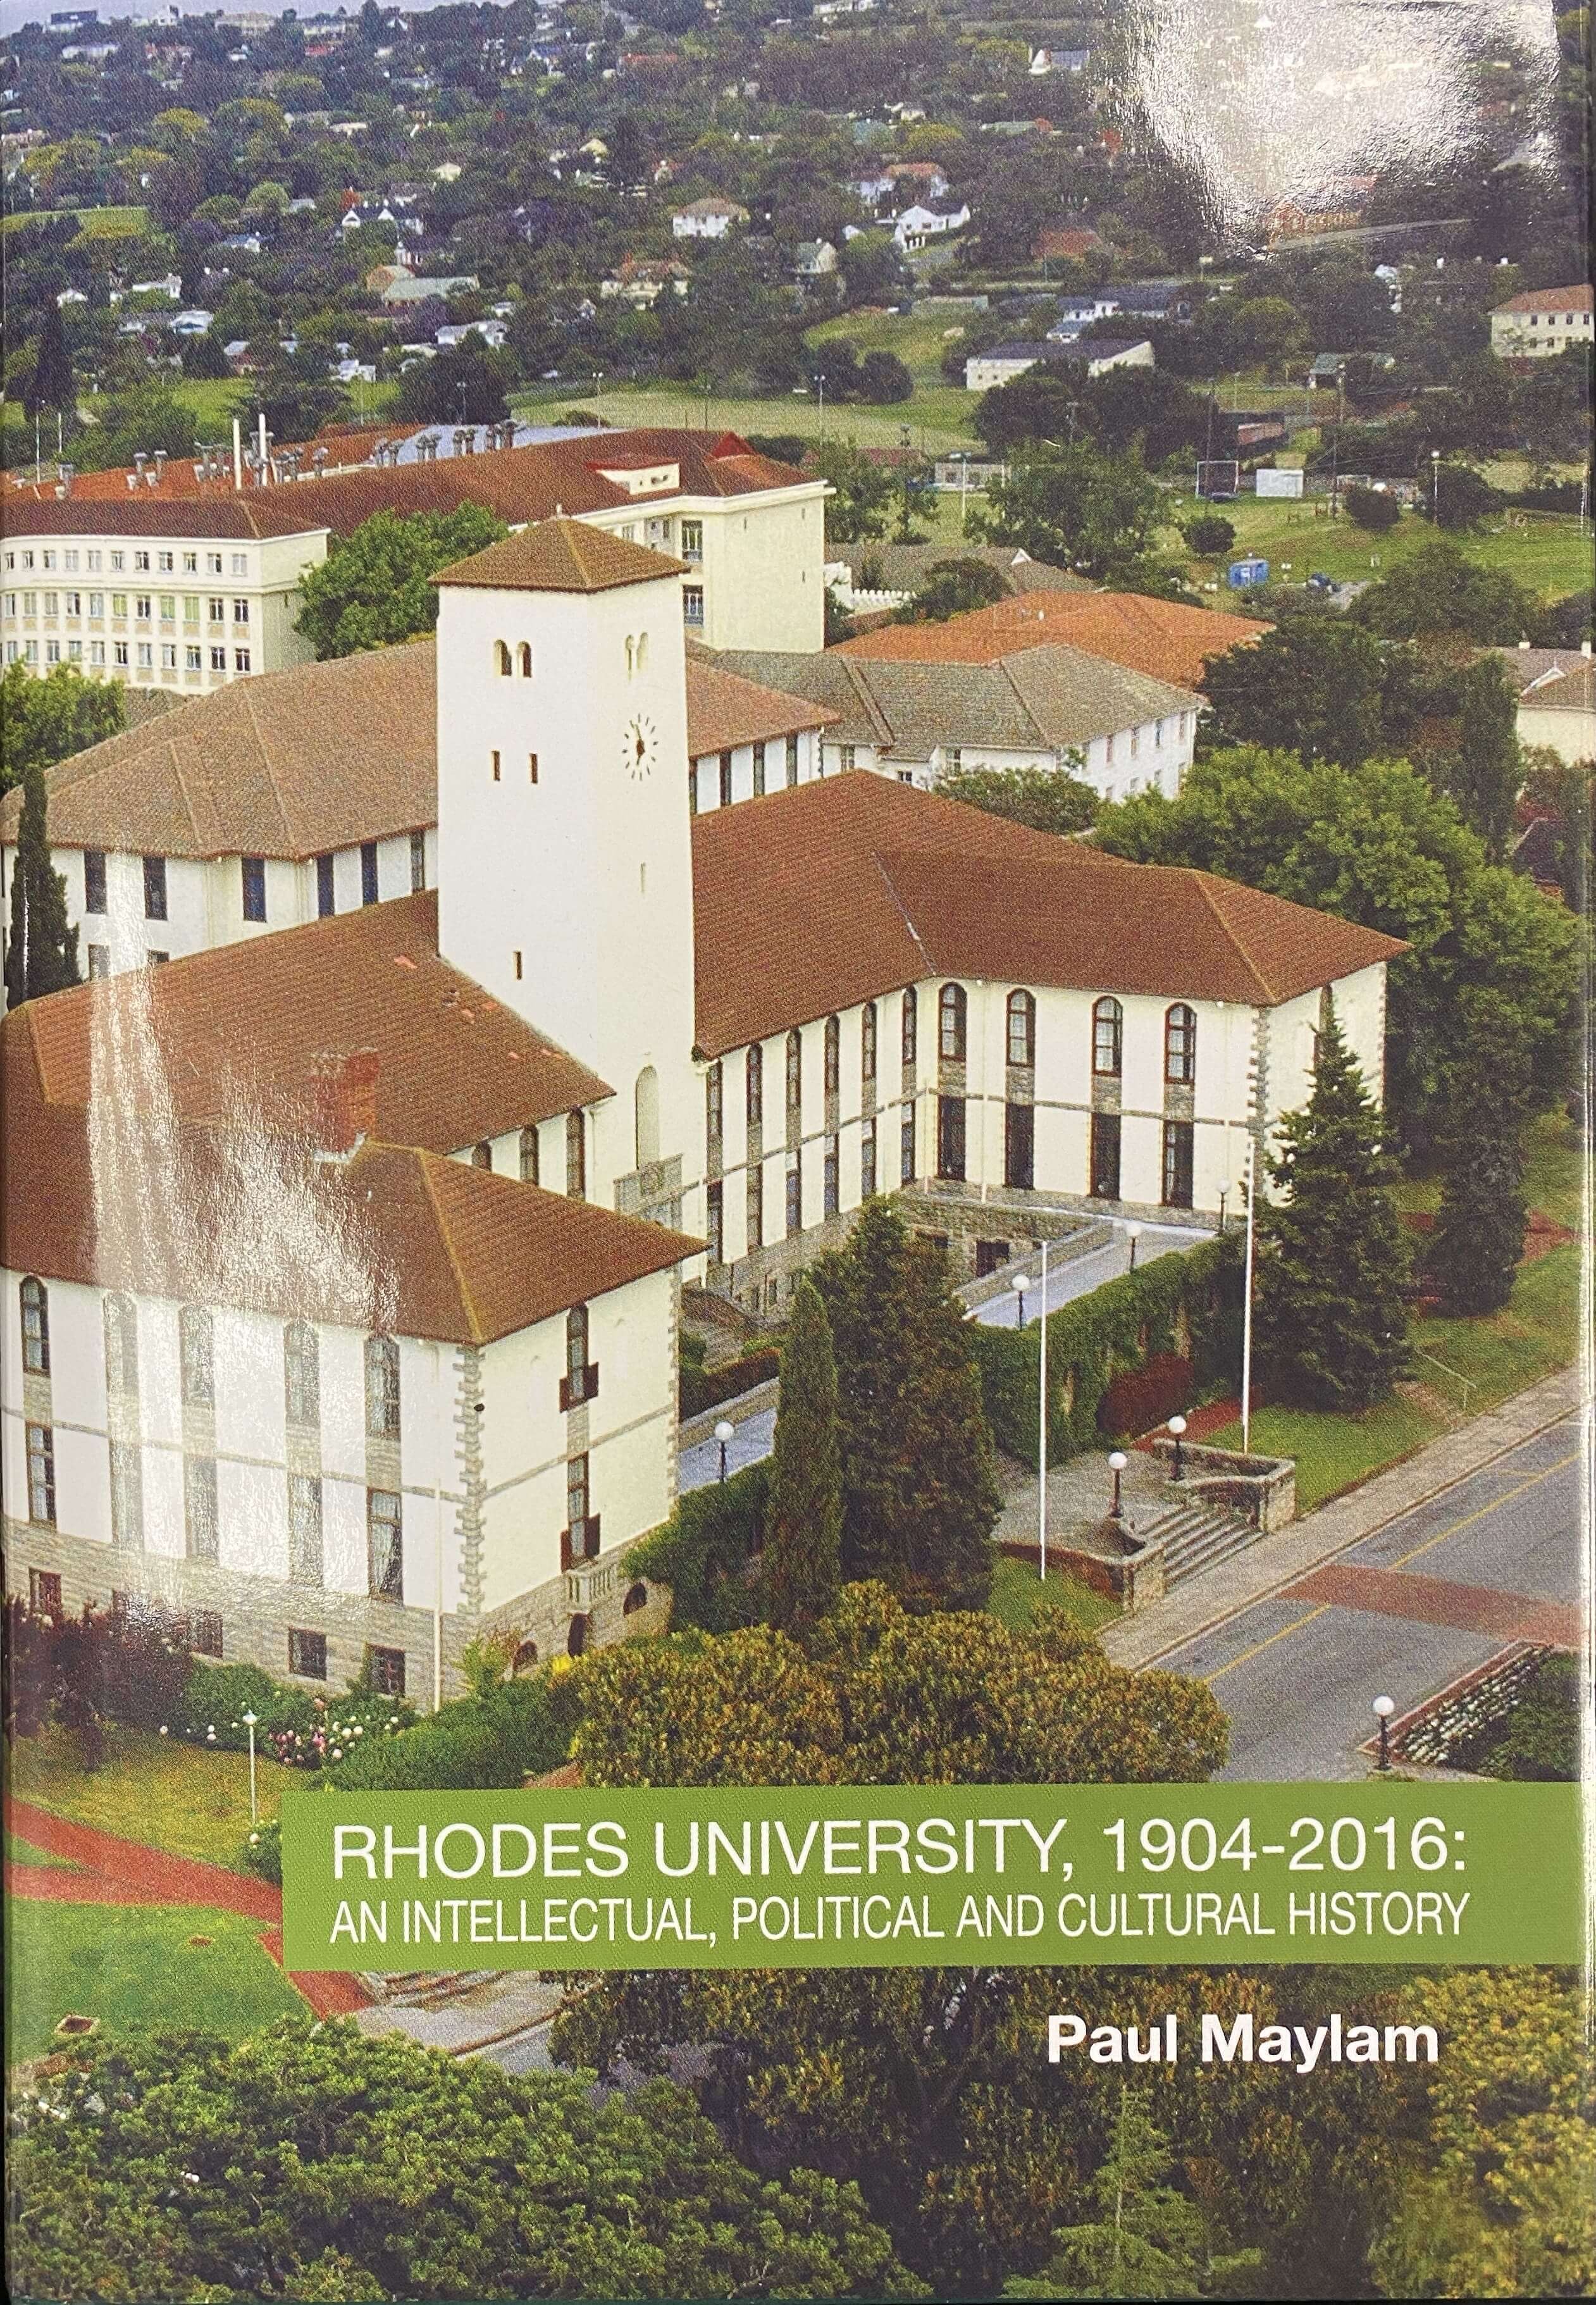 Book on the history of Rhodes University